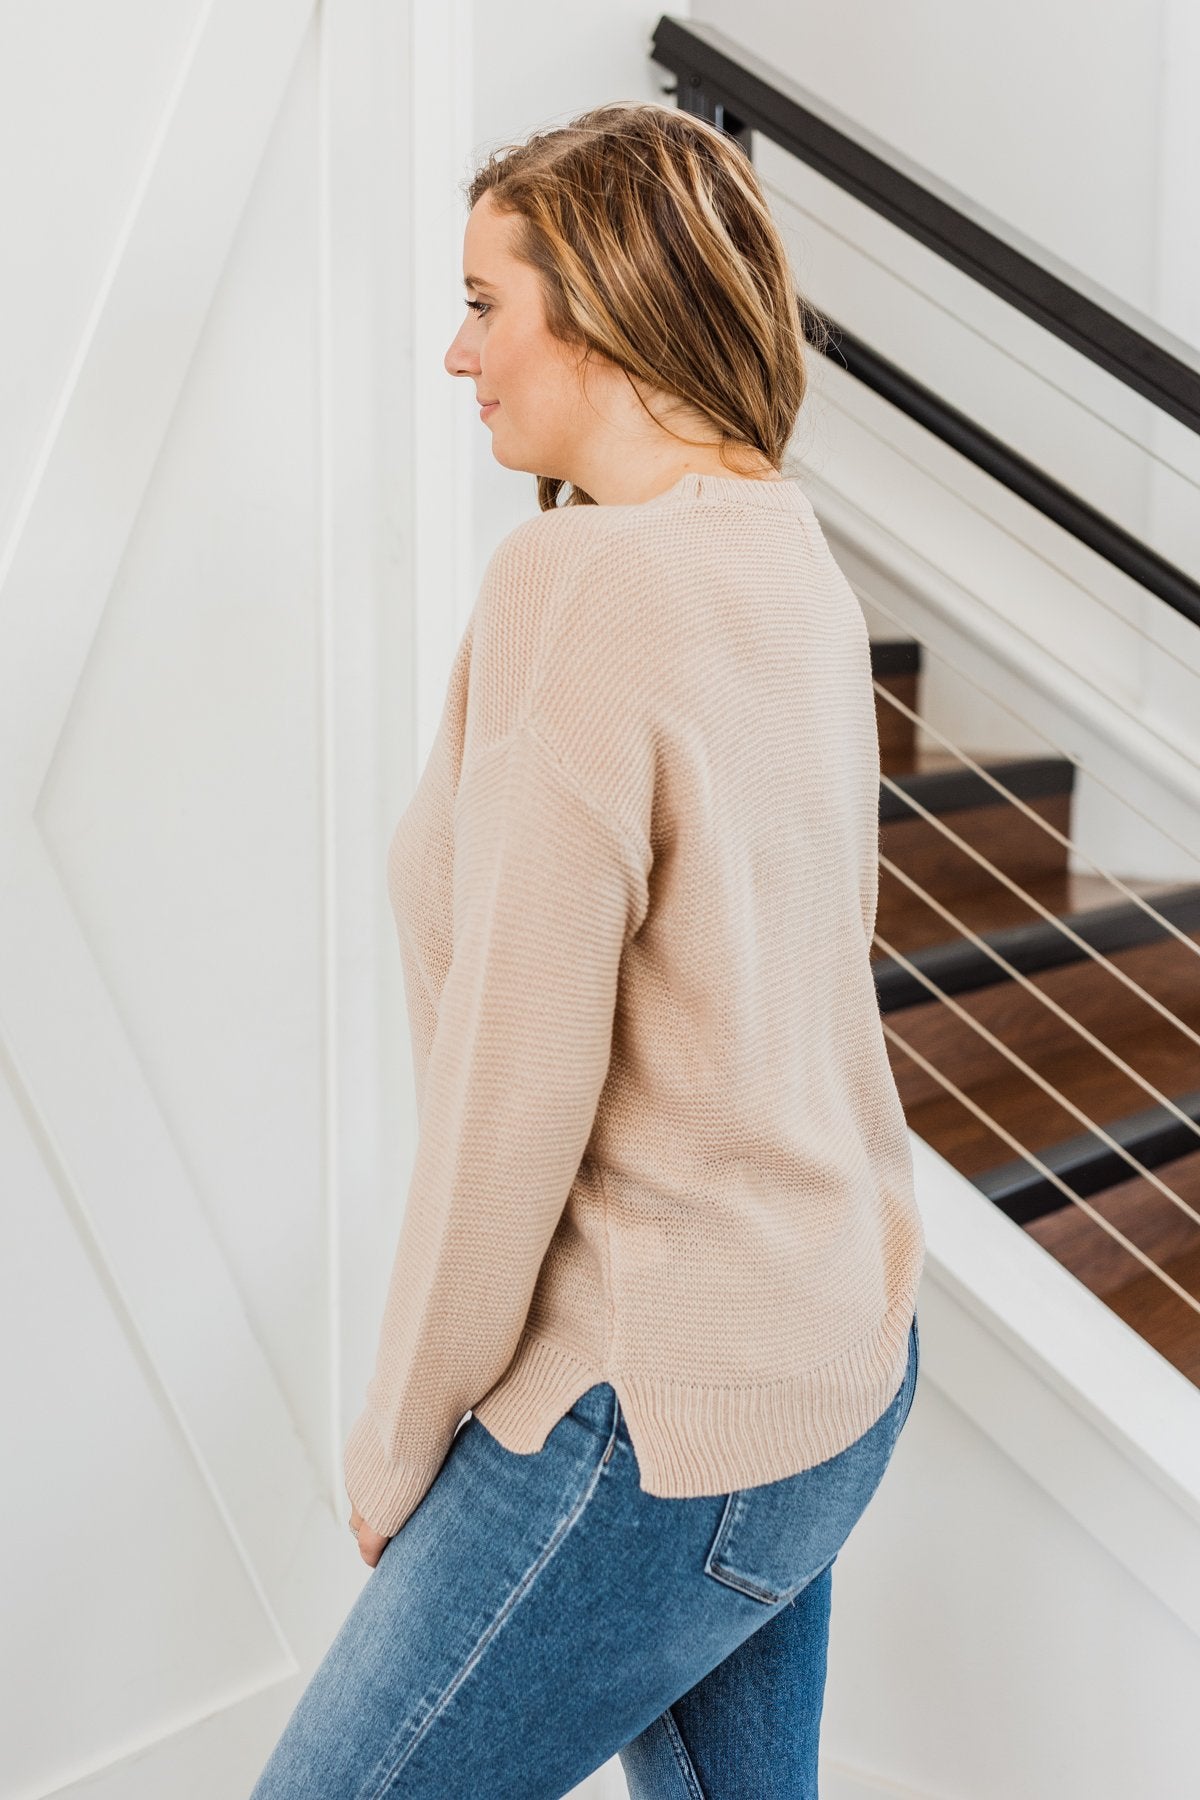 Today Is The Day Knit Sweater- Light Taupe